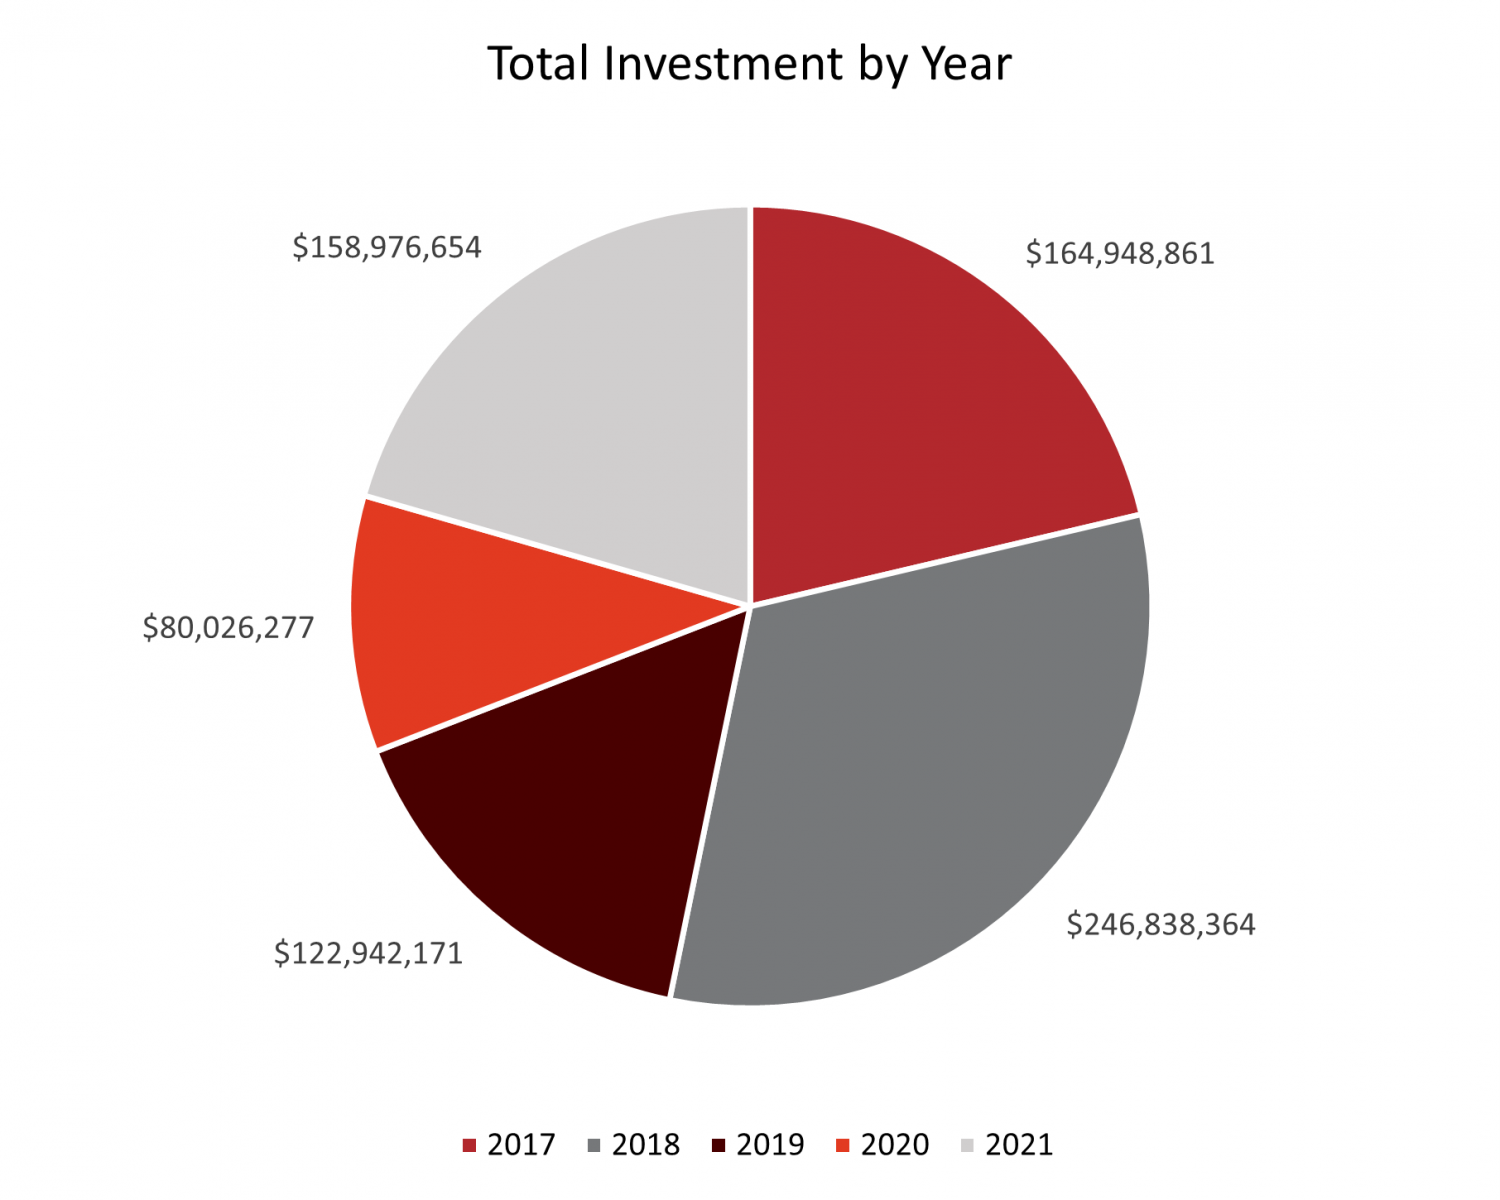 Total Investment by Year 2017-2021